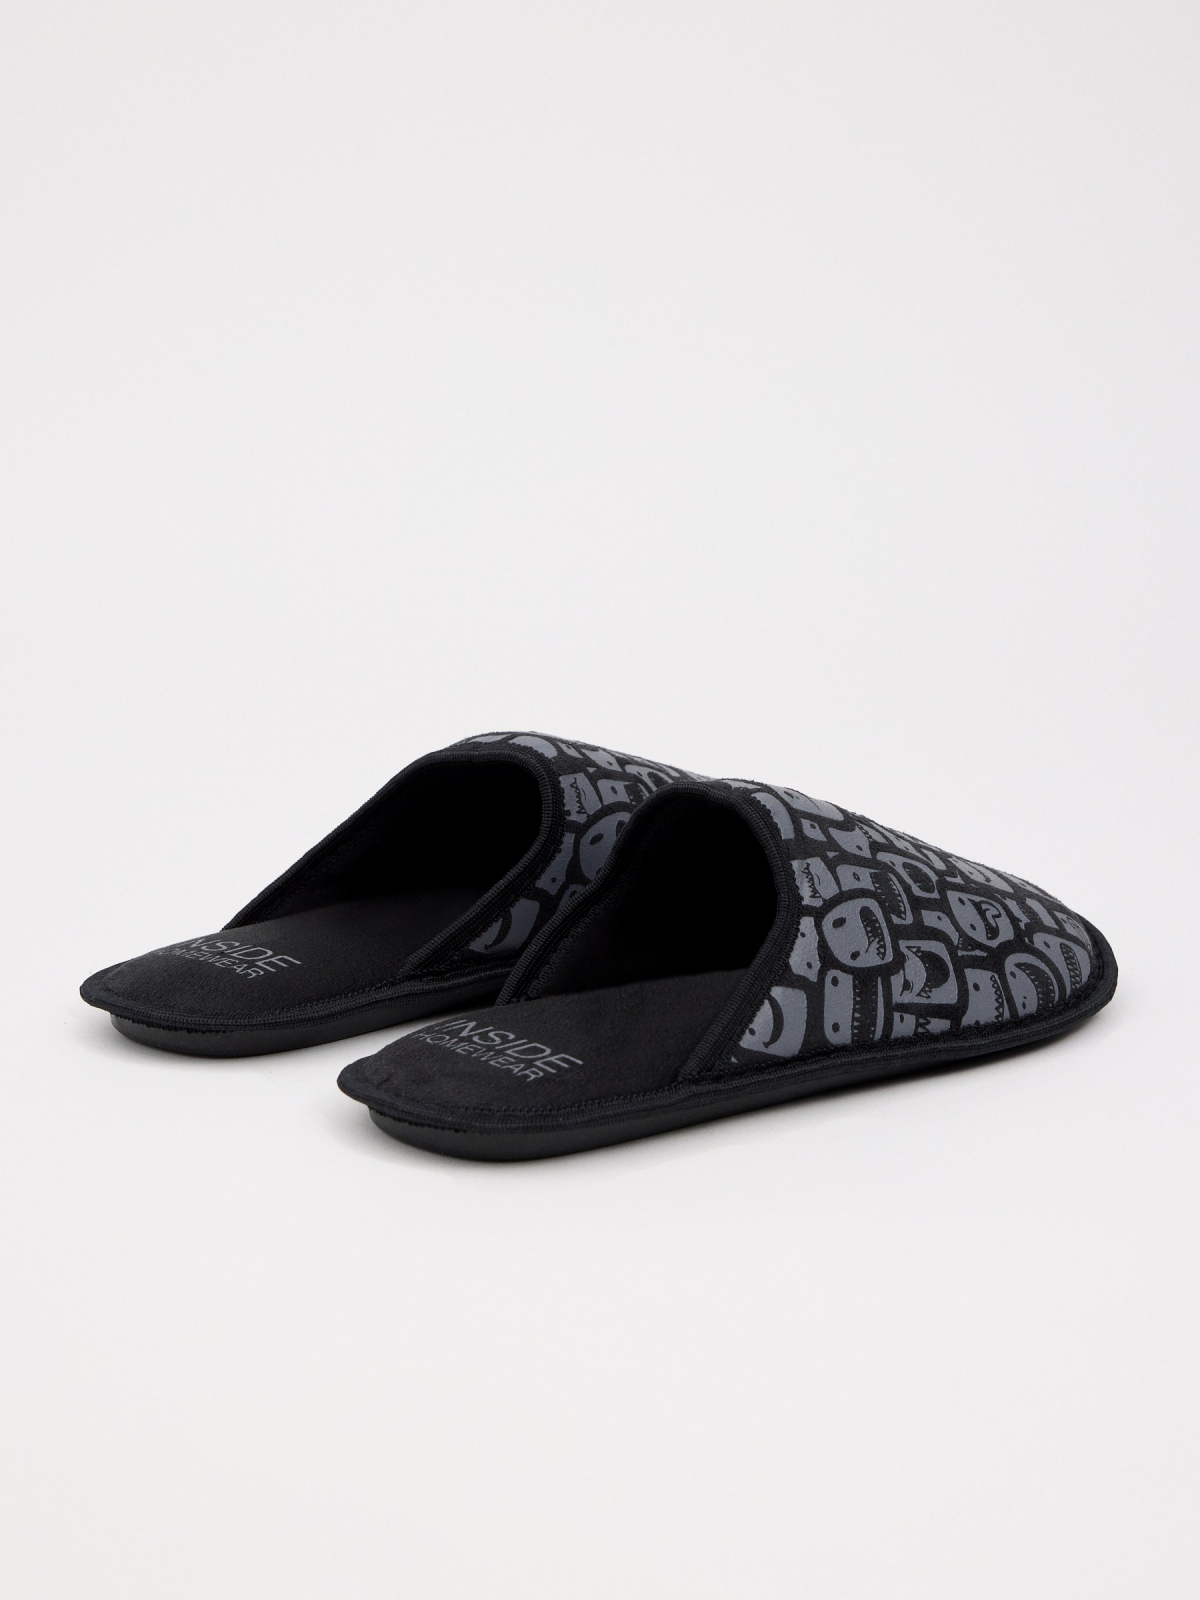 Printed slippers black front view